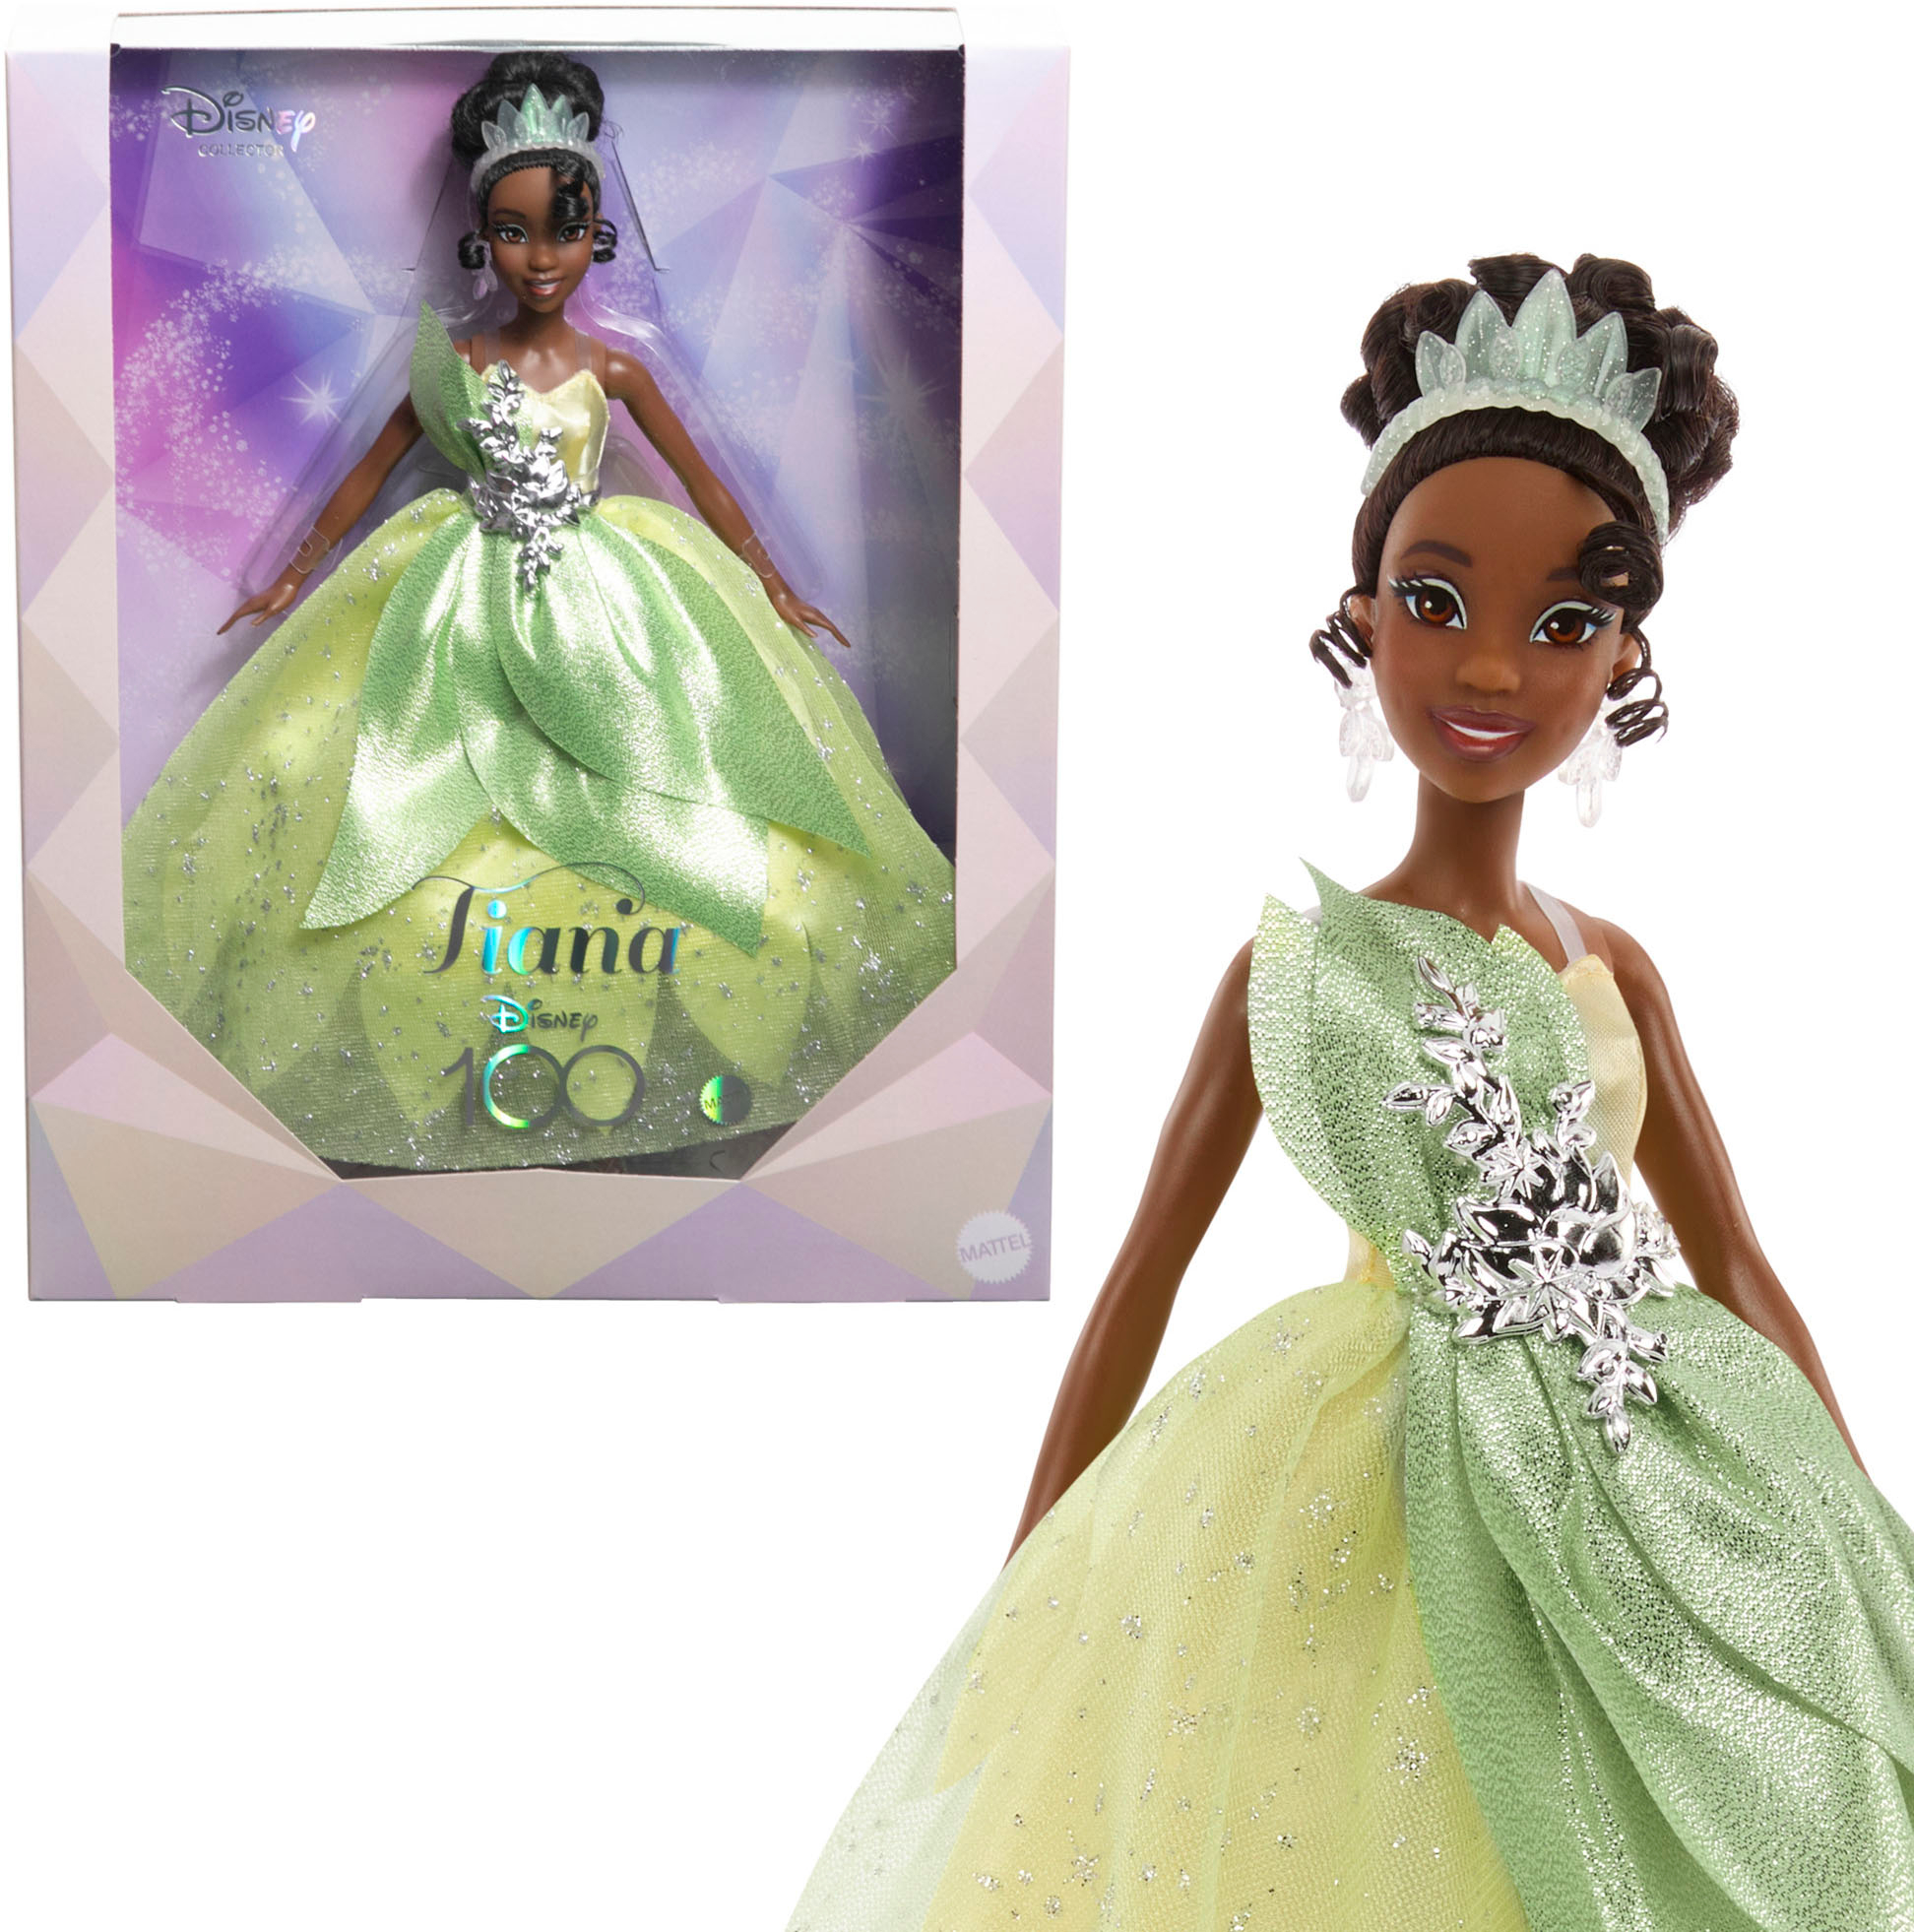 Angle View: Disney - 100 Year Anniversary Collector Tiana Doll